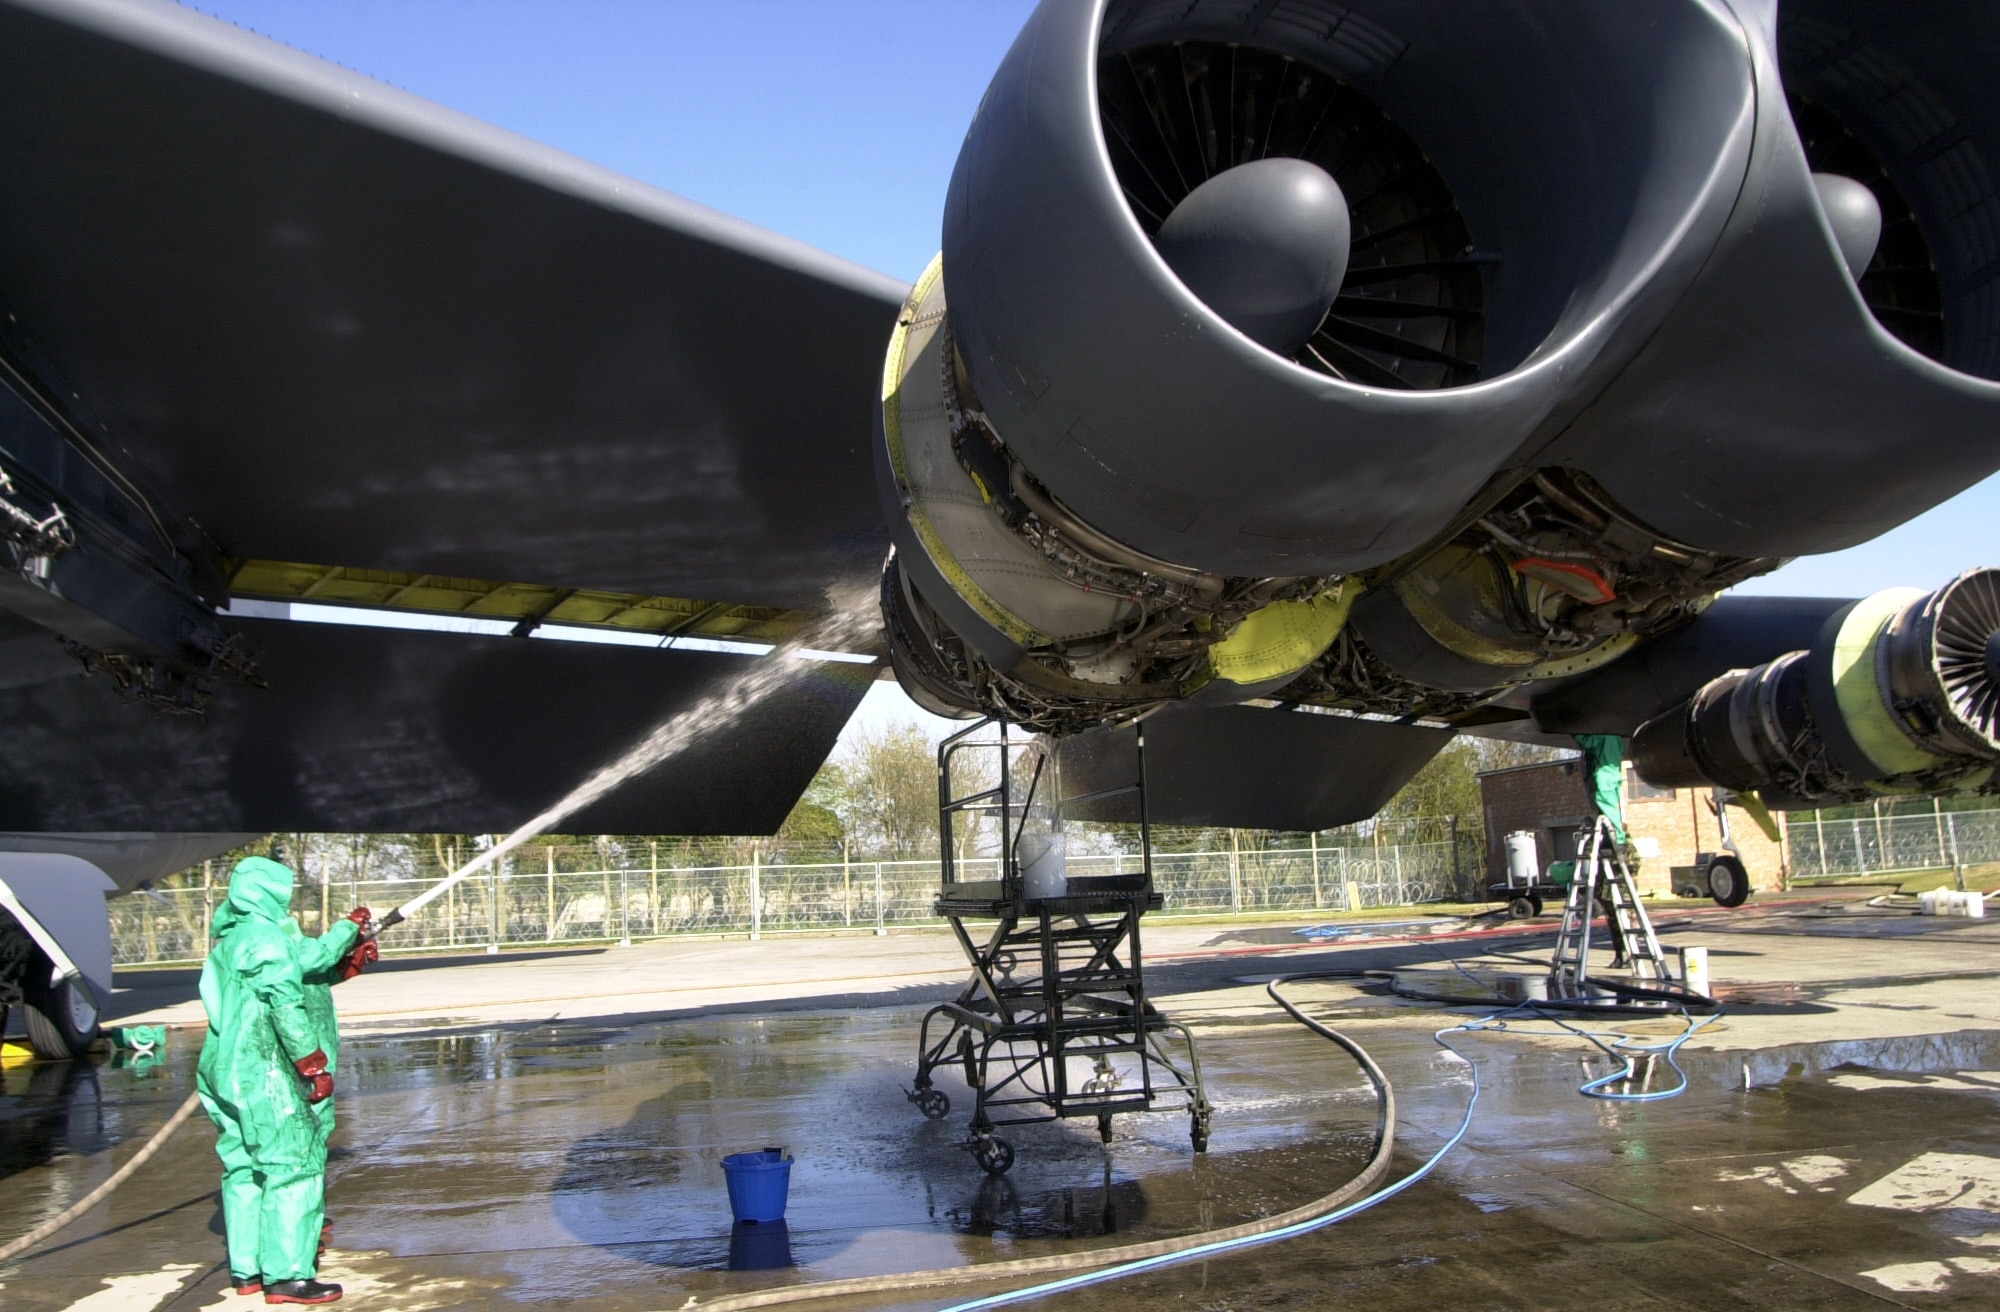 OPERATION IRAQI FREEDOM -- deployed to a forward location  perform a "wash" on a B-52 Stratofortress.  The planes are washed routinely every 120 days to prevent corrosion.  The base at which these troops are deployed is currently home of the 457th Air Expeditionary Group which has been positioned to support Operation Iraqi Freedom.  The operation is the multinational coalition effort to liberate the Iraqi people, eliminate Iraq's weapons of mass destruction and end the regime of Saddam Hussein. (U.S. Air Force photo by Airman 1st Class Stacia M. Willis)  